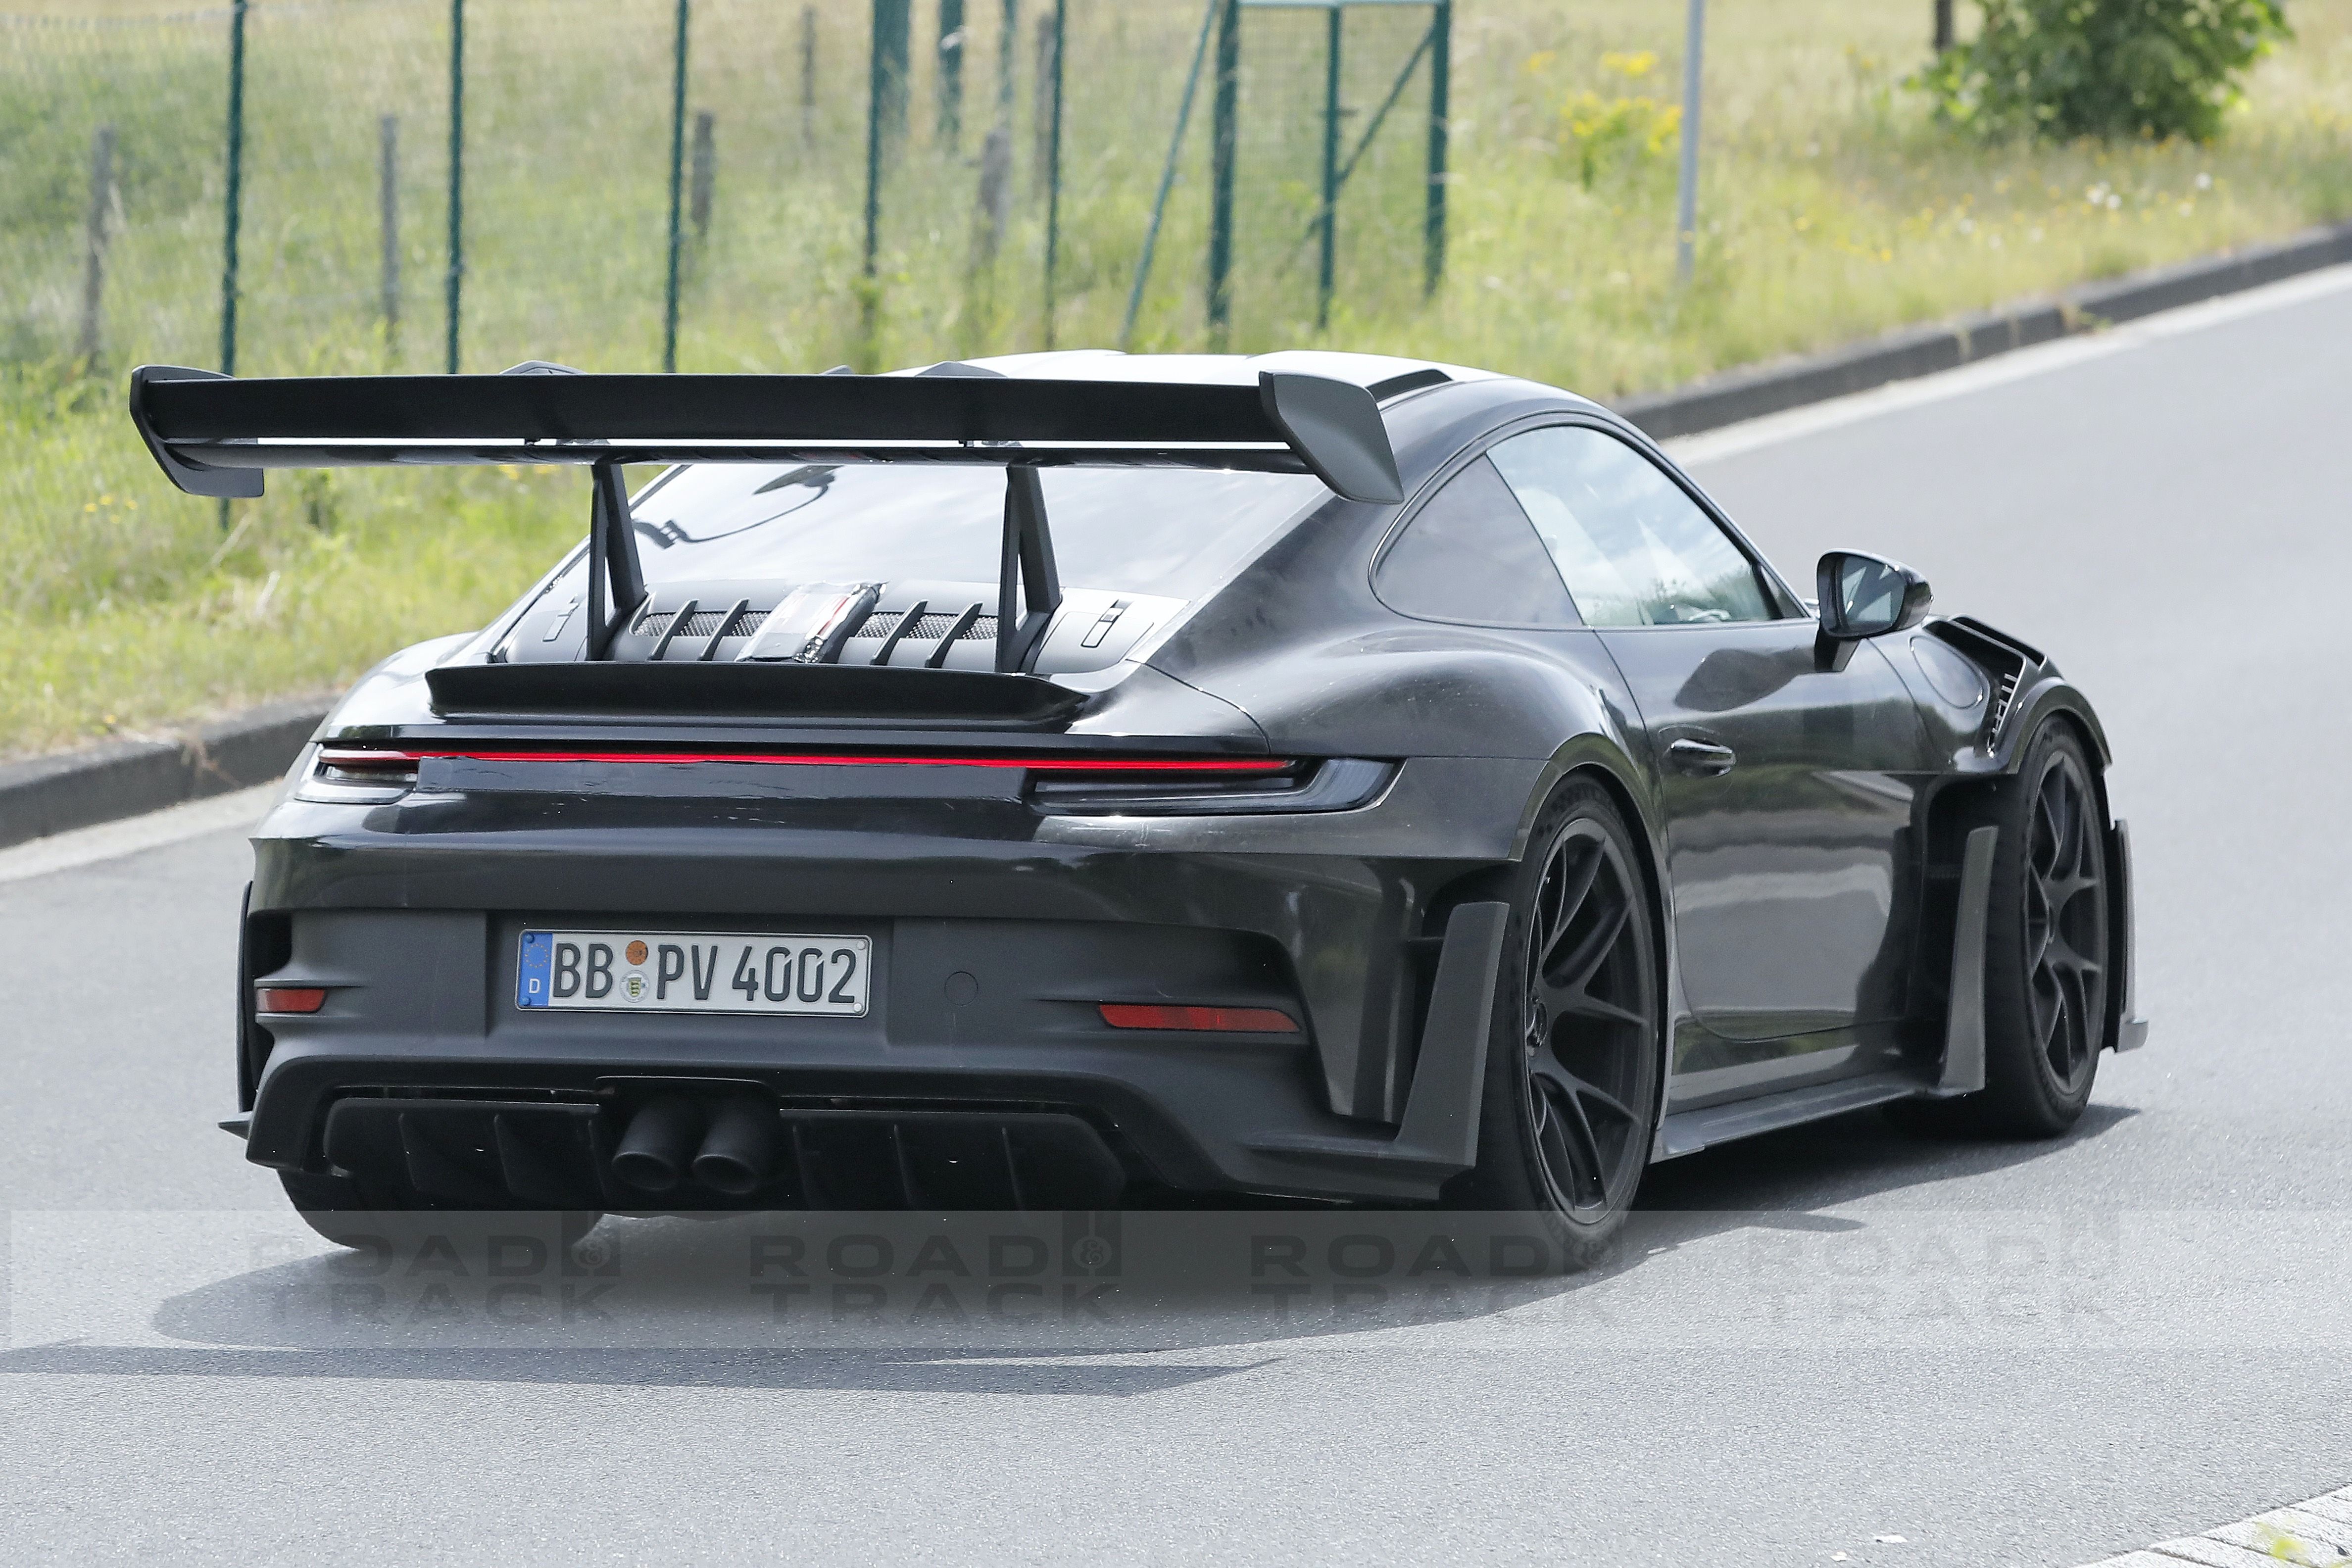 This Porsche 911 GT3 RS Previews an Awesome Limited-Edition Spec - CNET